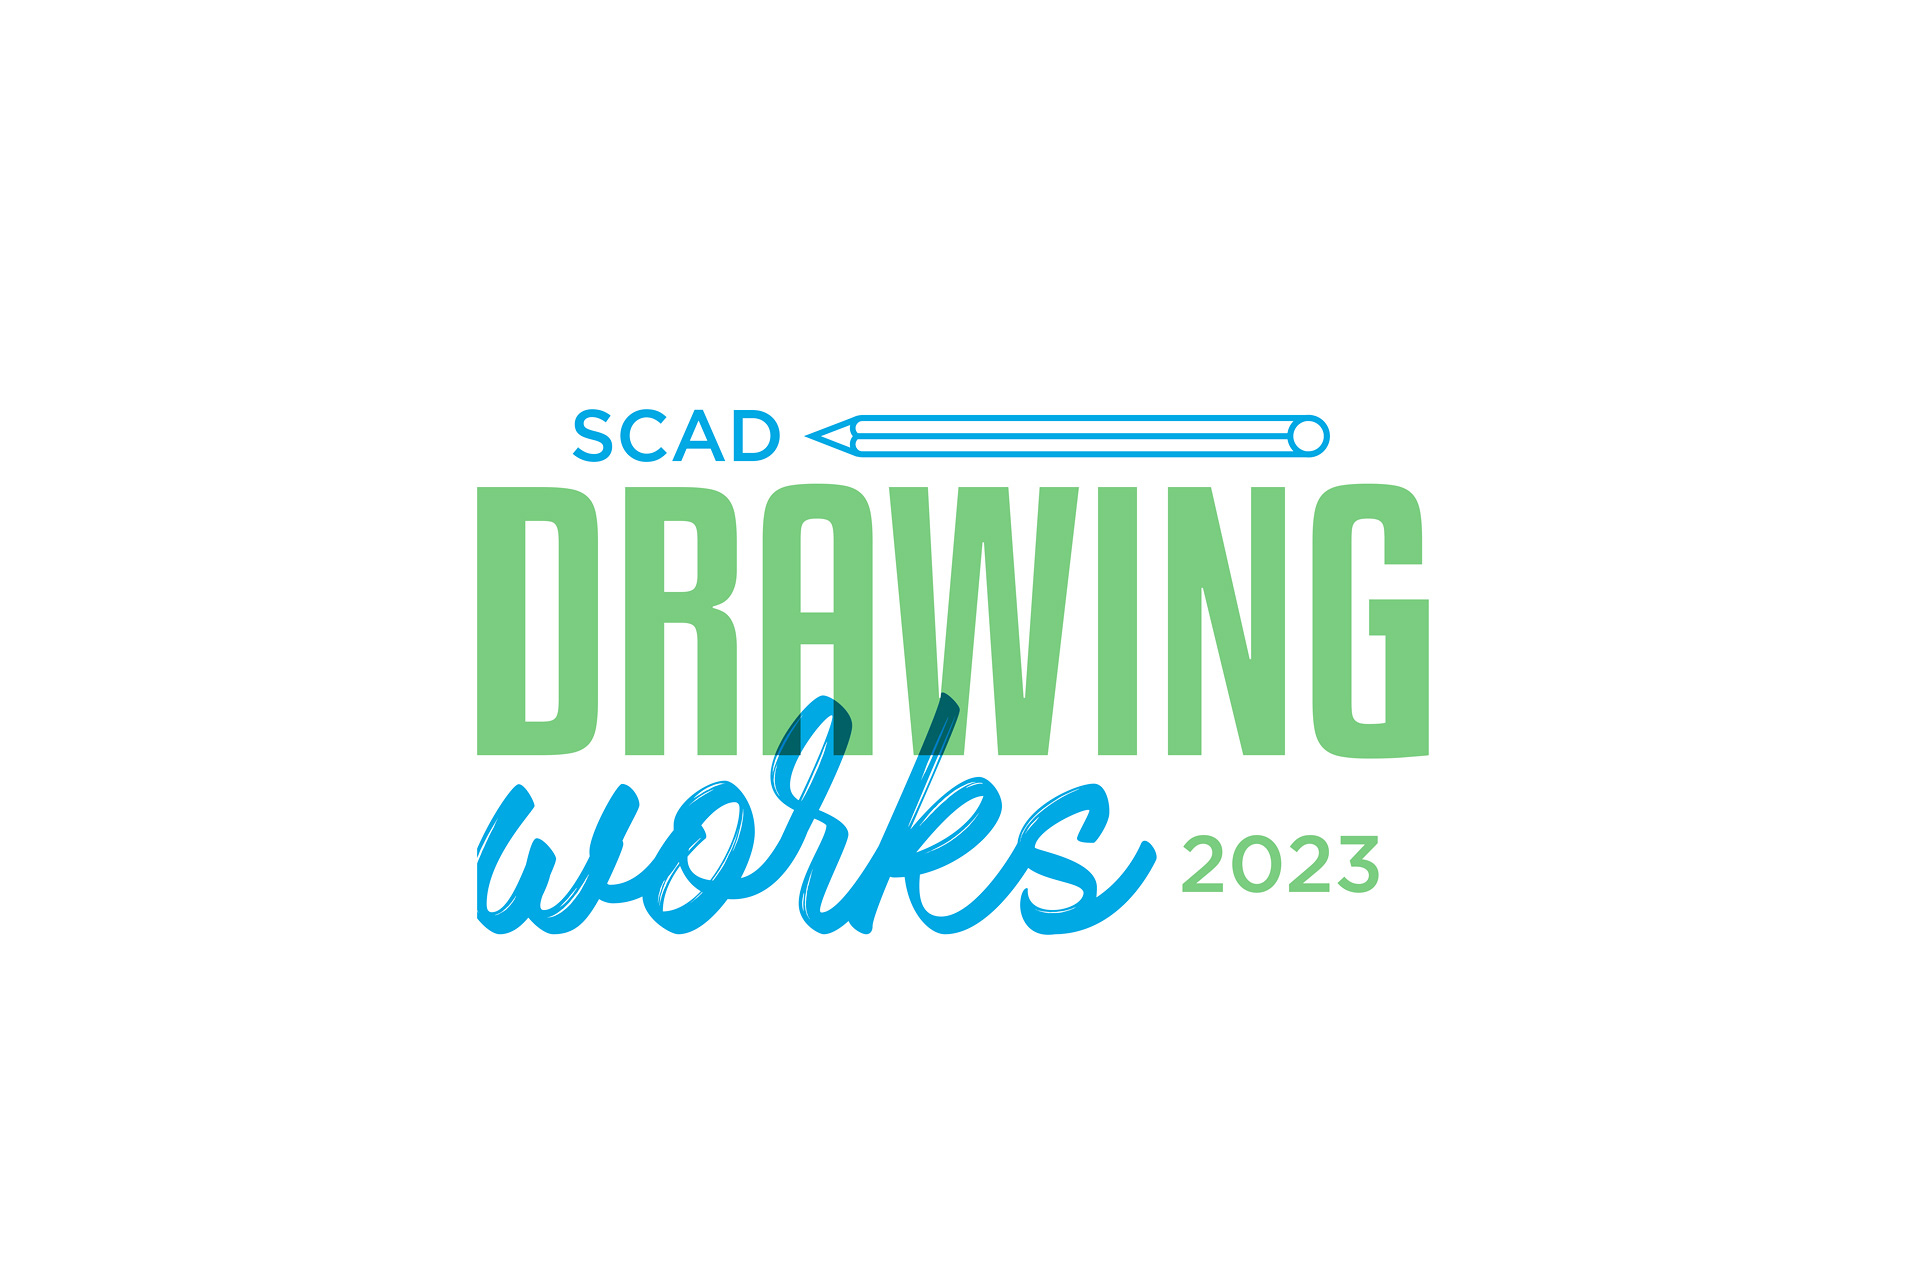 Foundation Studies Drawing Works 2023 